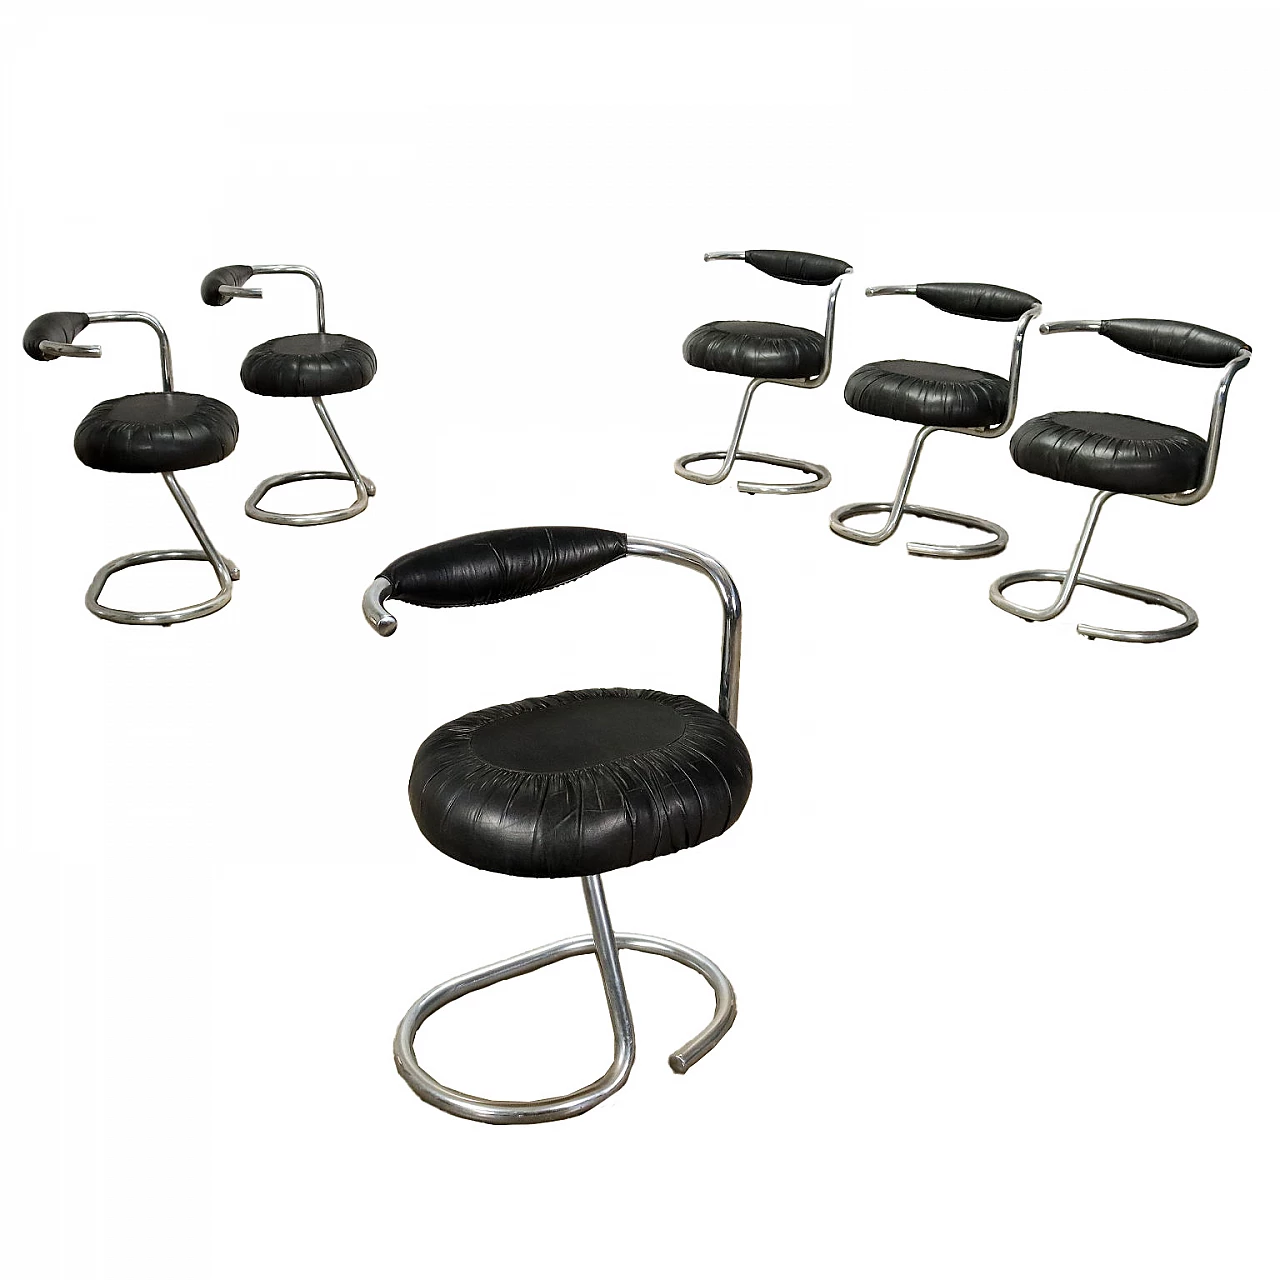 6 Tubular steel chairs with leatherette upholstery, 1970s 1